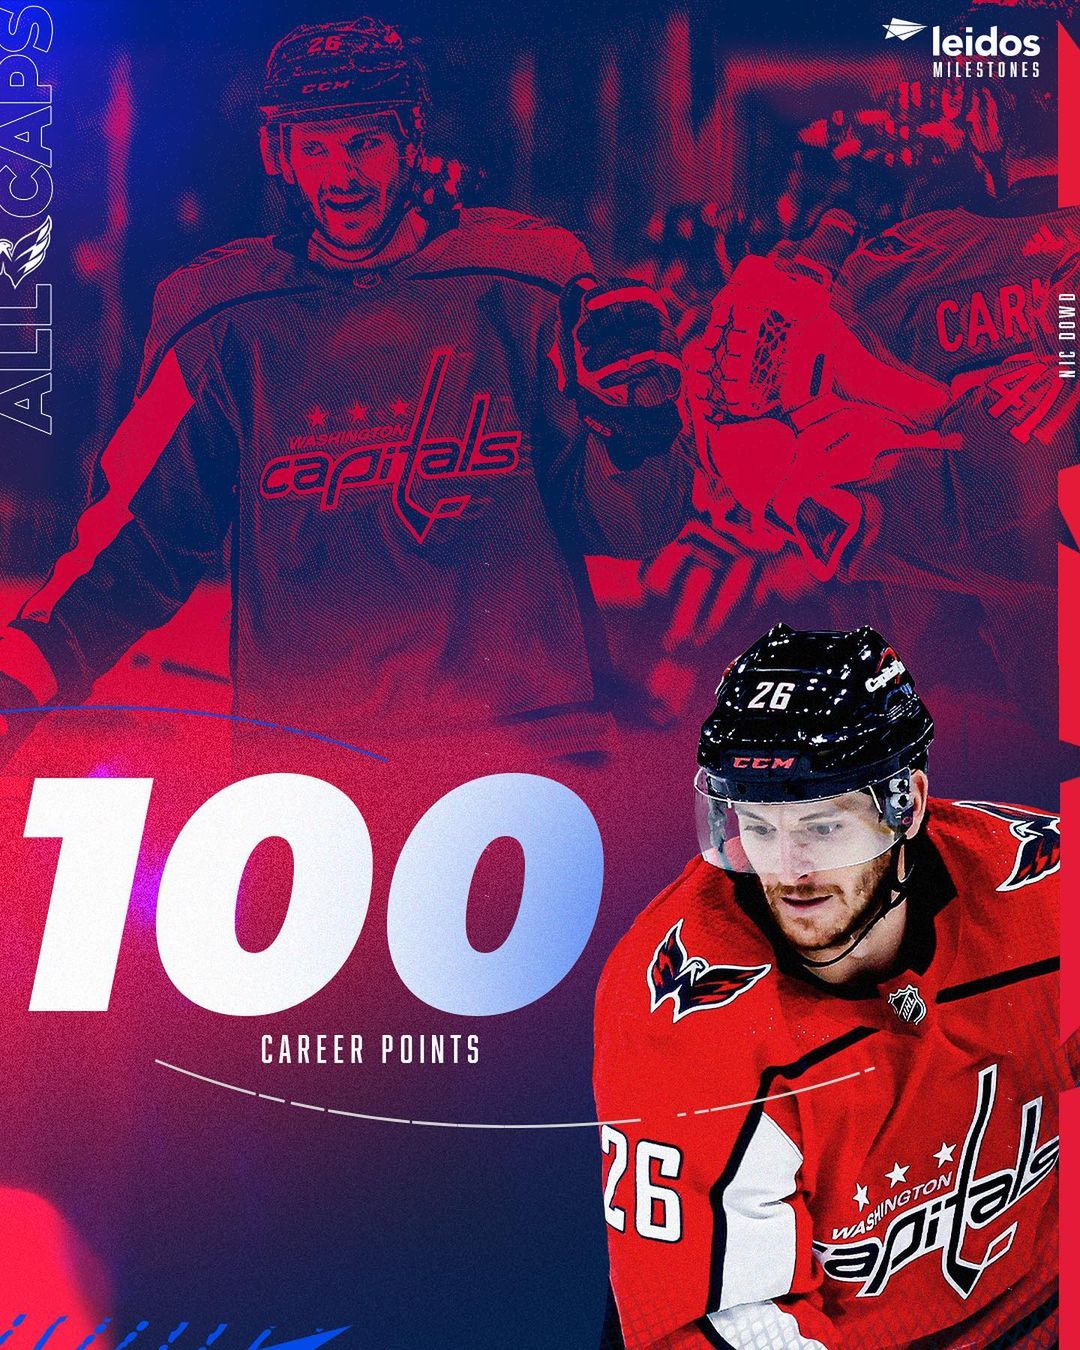 dowder’s 10th goal of the season is his 100th career point!...